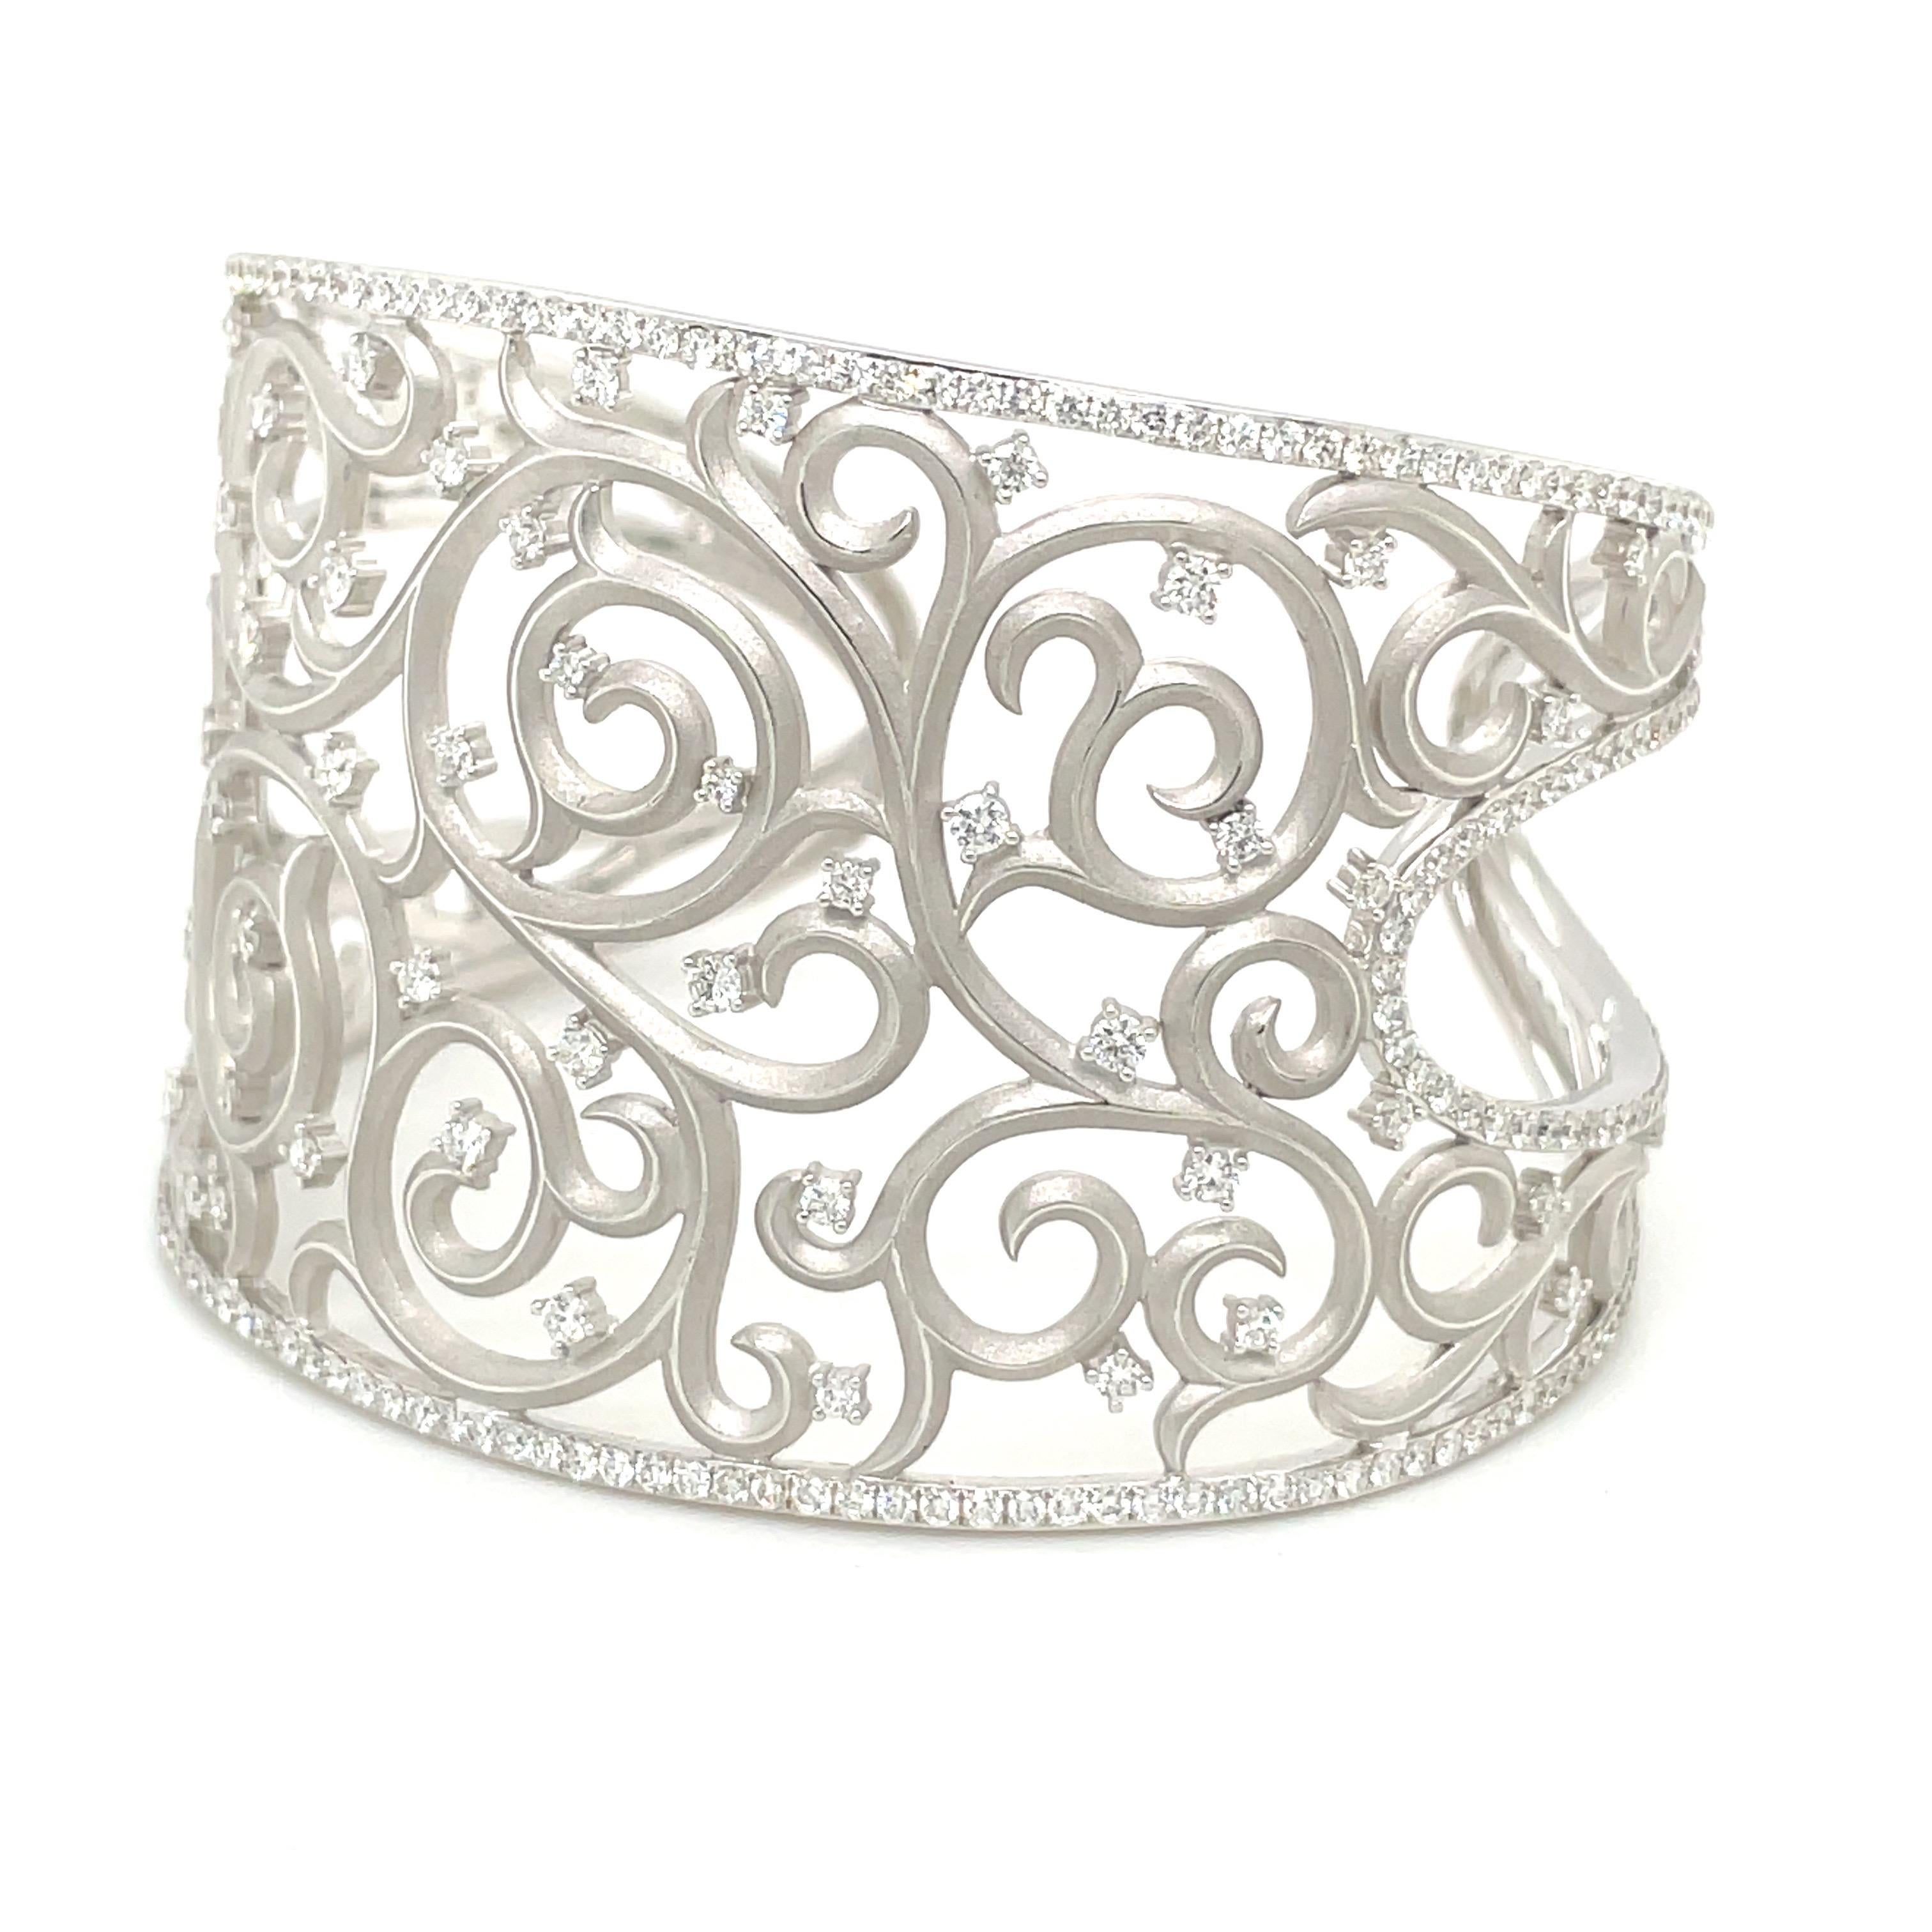 Cellini 18kt White Gold and Diamond 4.90Ct. Lace Cuff Bracelet For Sale 7